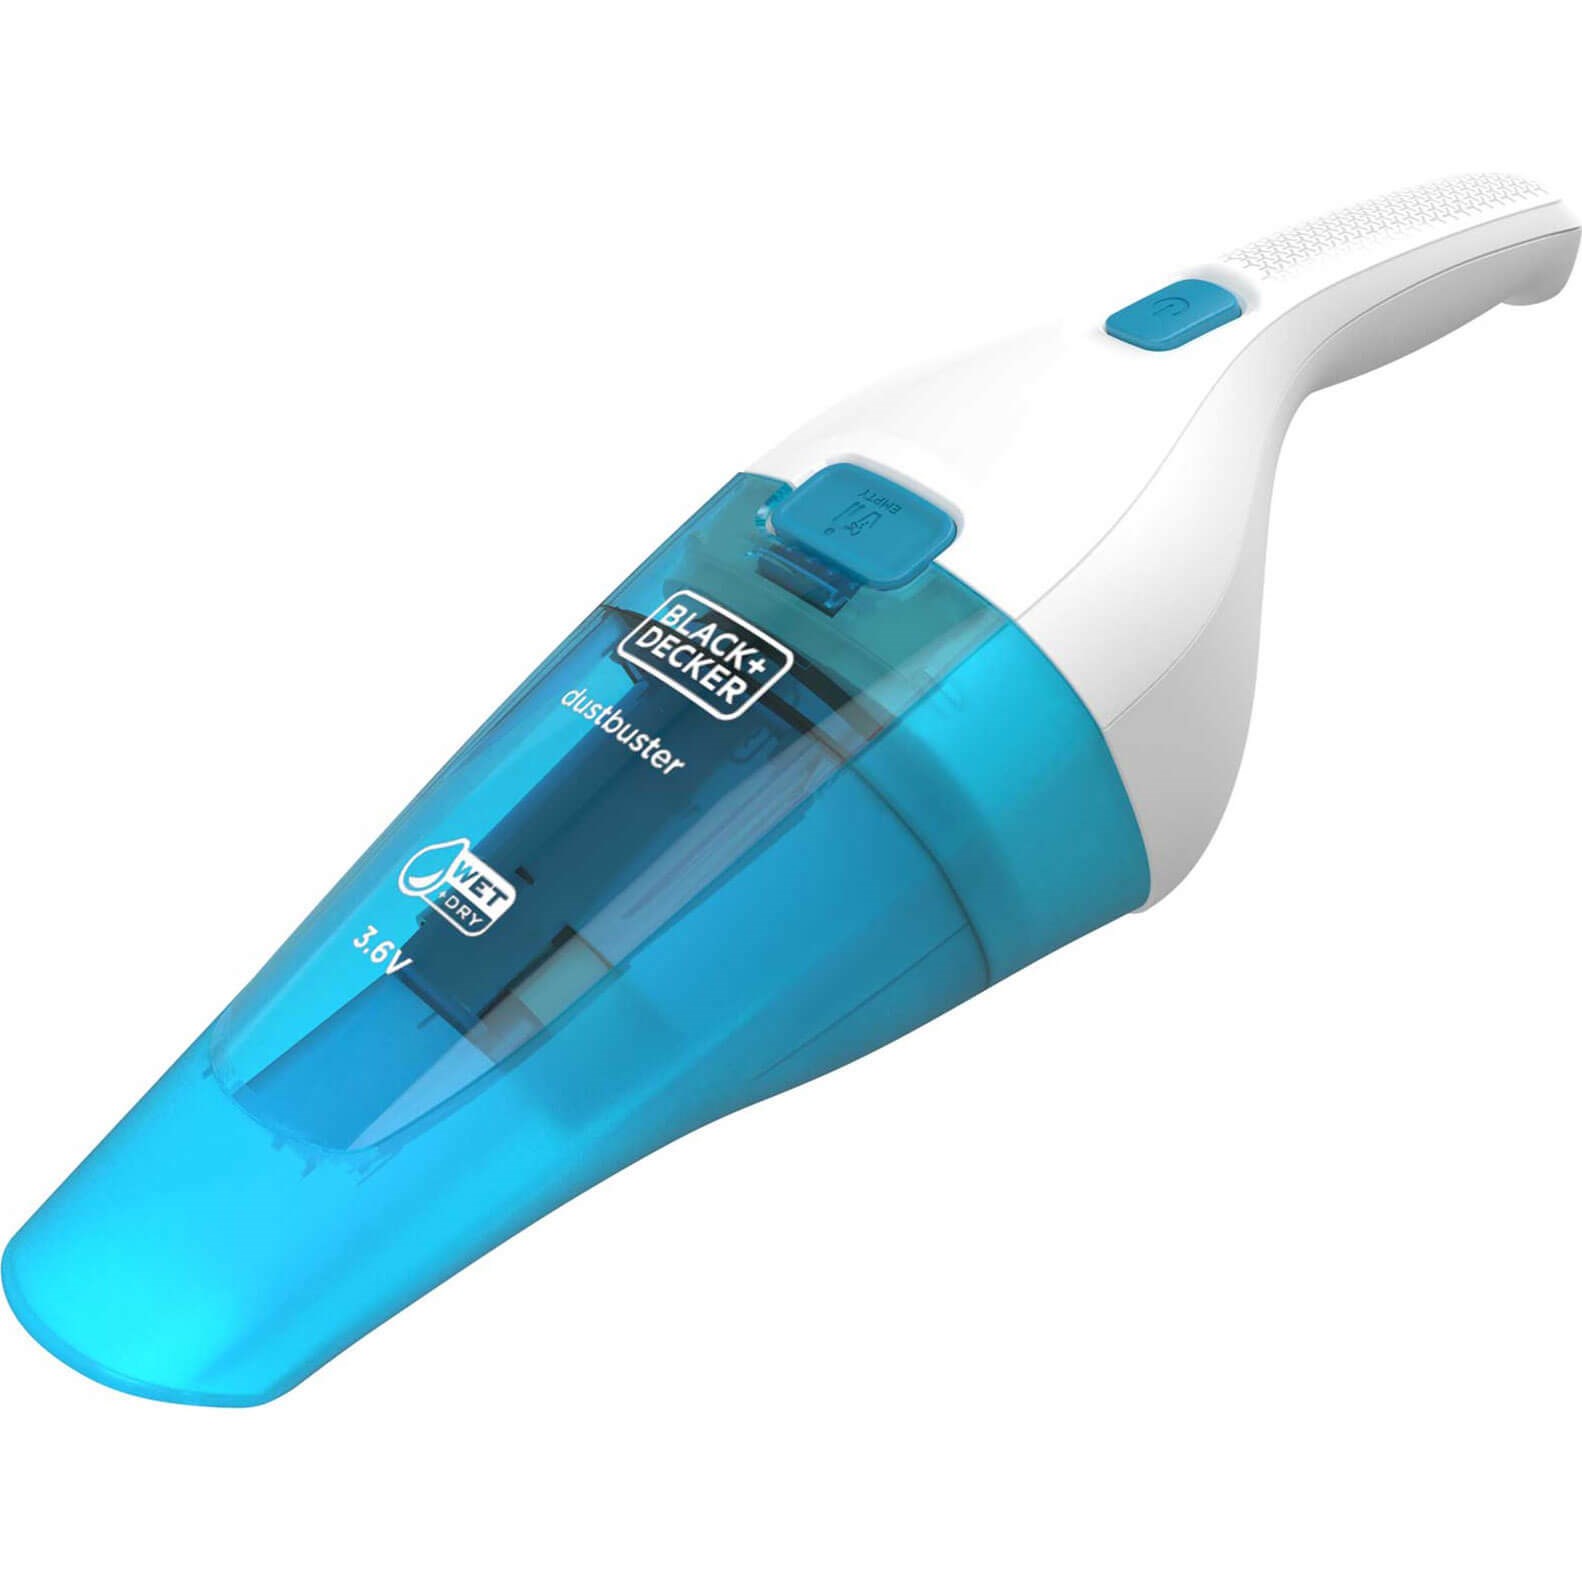 Black and Decker WDC115WA 3.6v Cordless Wet and Dry Dustbuster